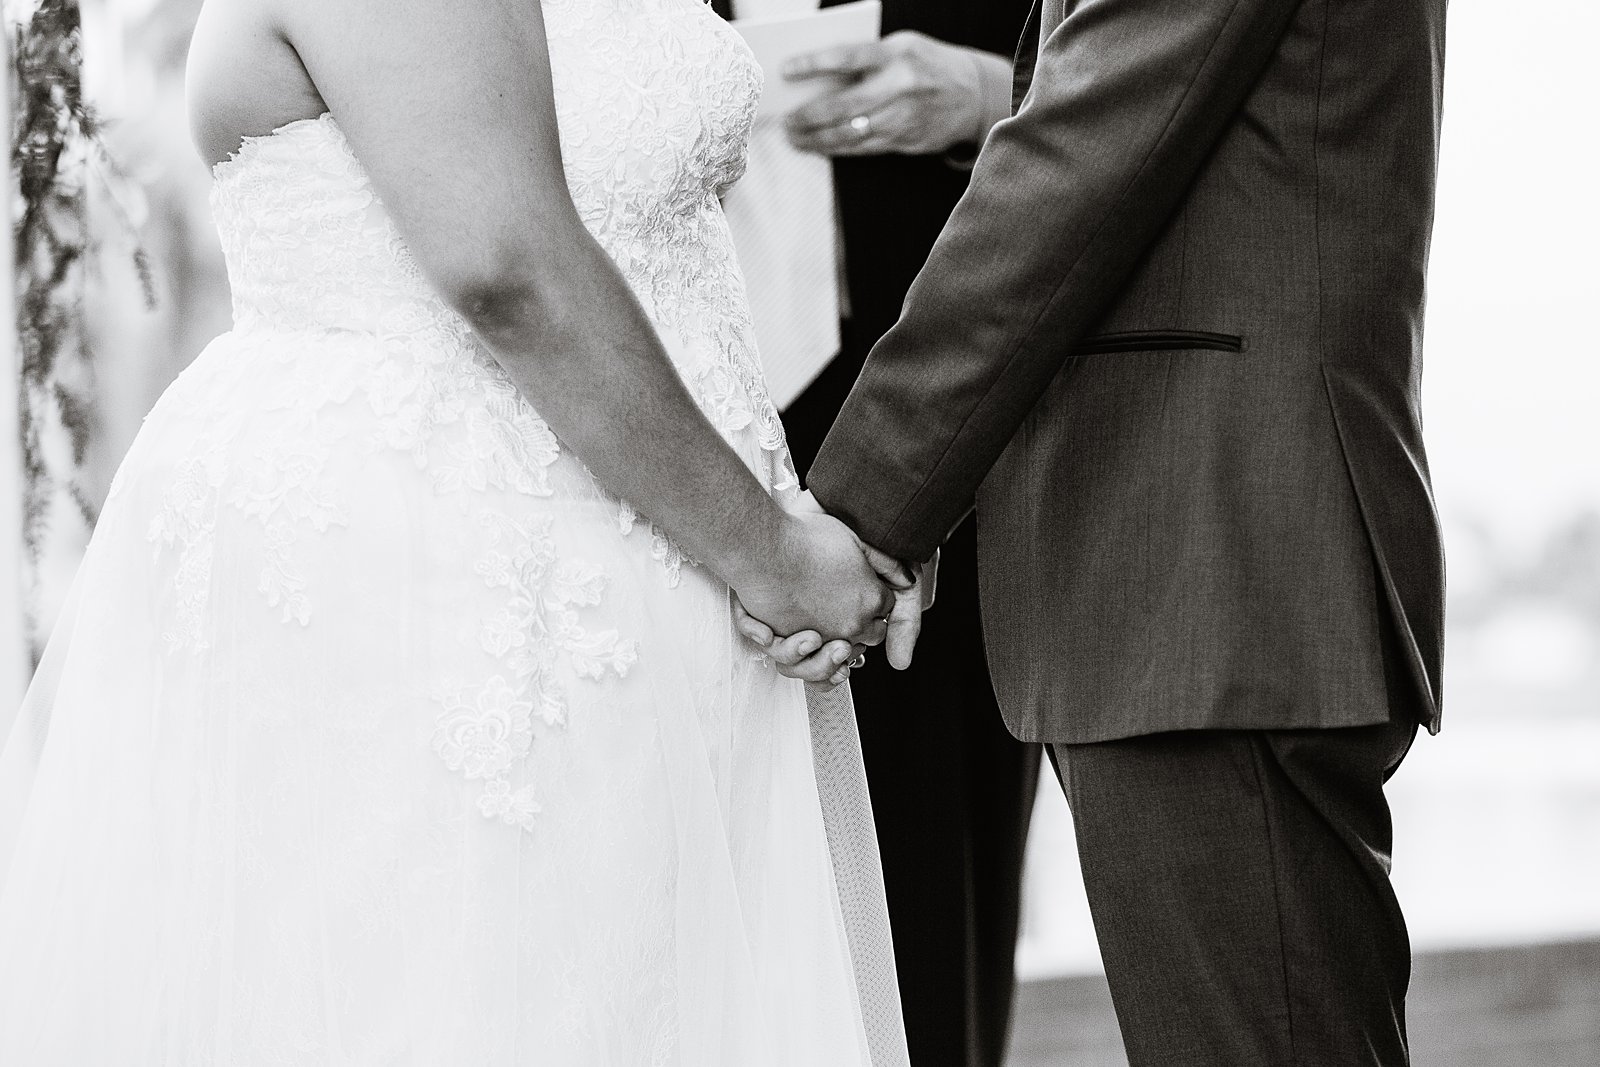 Bride and groom holding hand during their wedding ceremony by Phoenix wedding photographer PMA Photography.